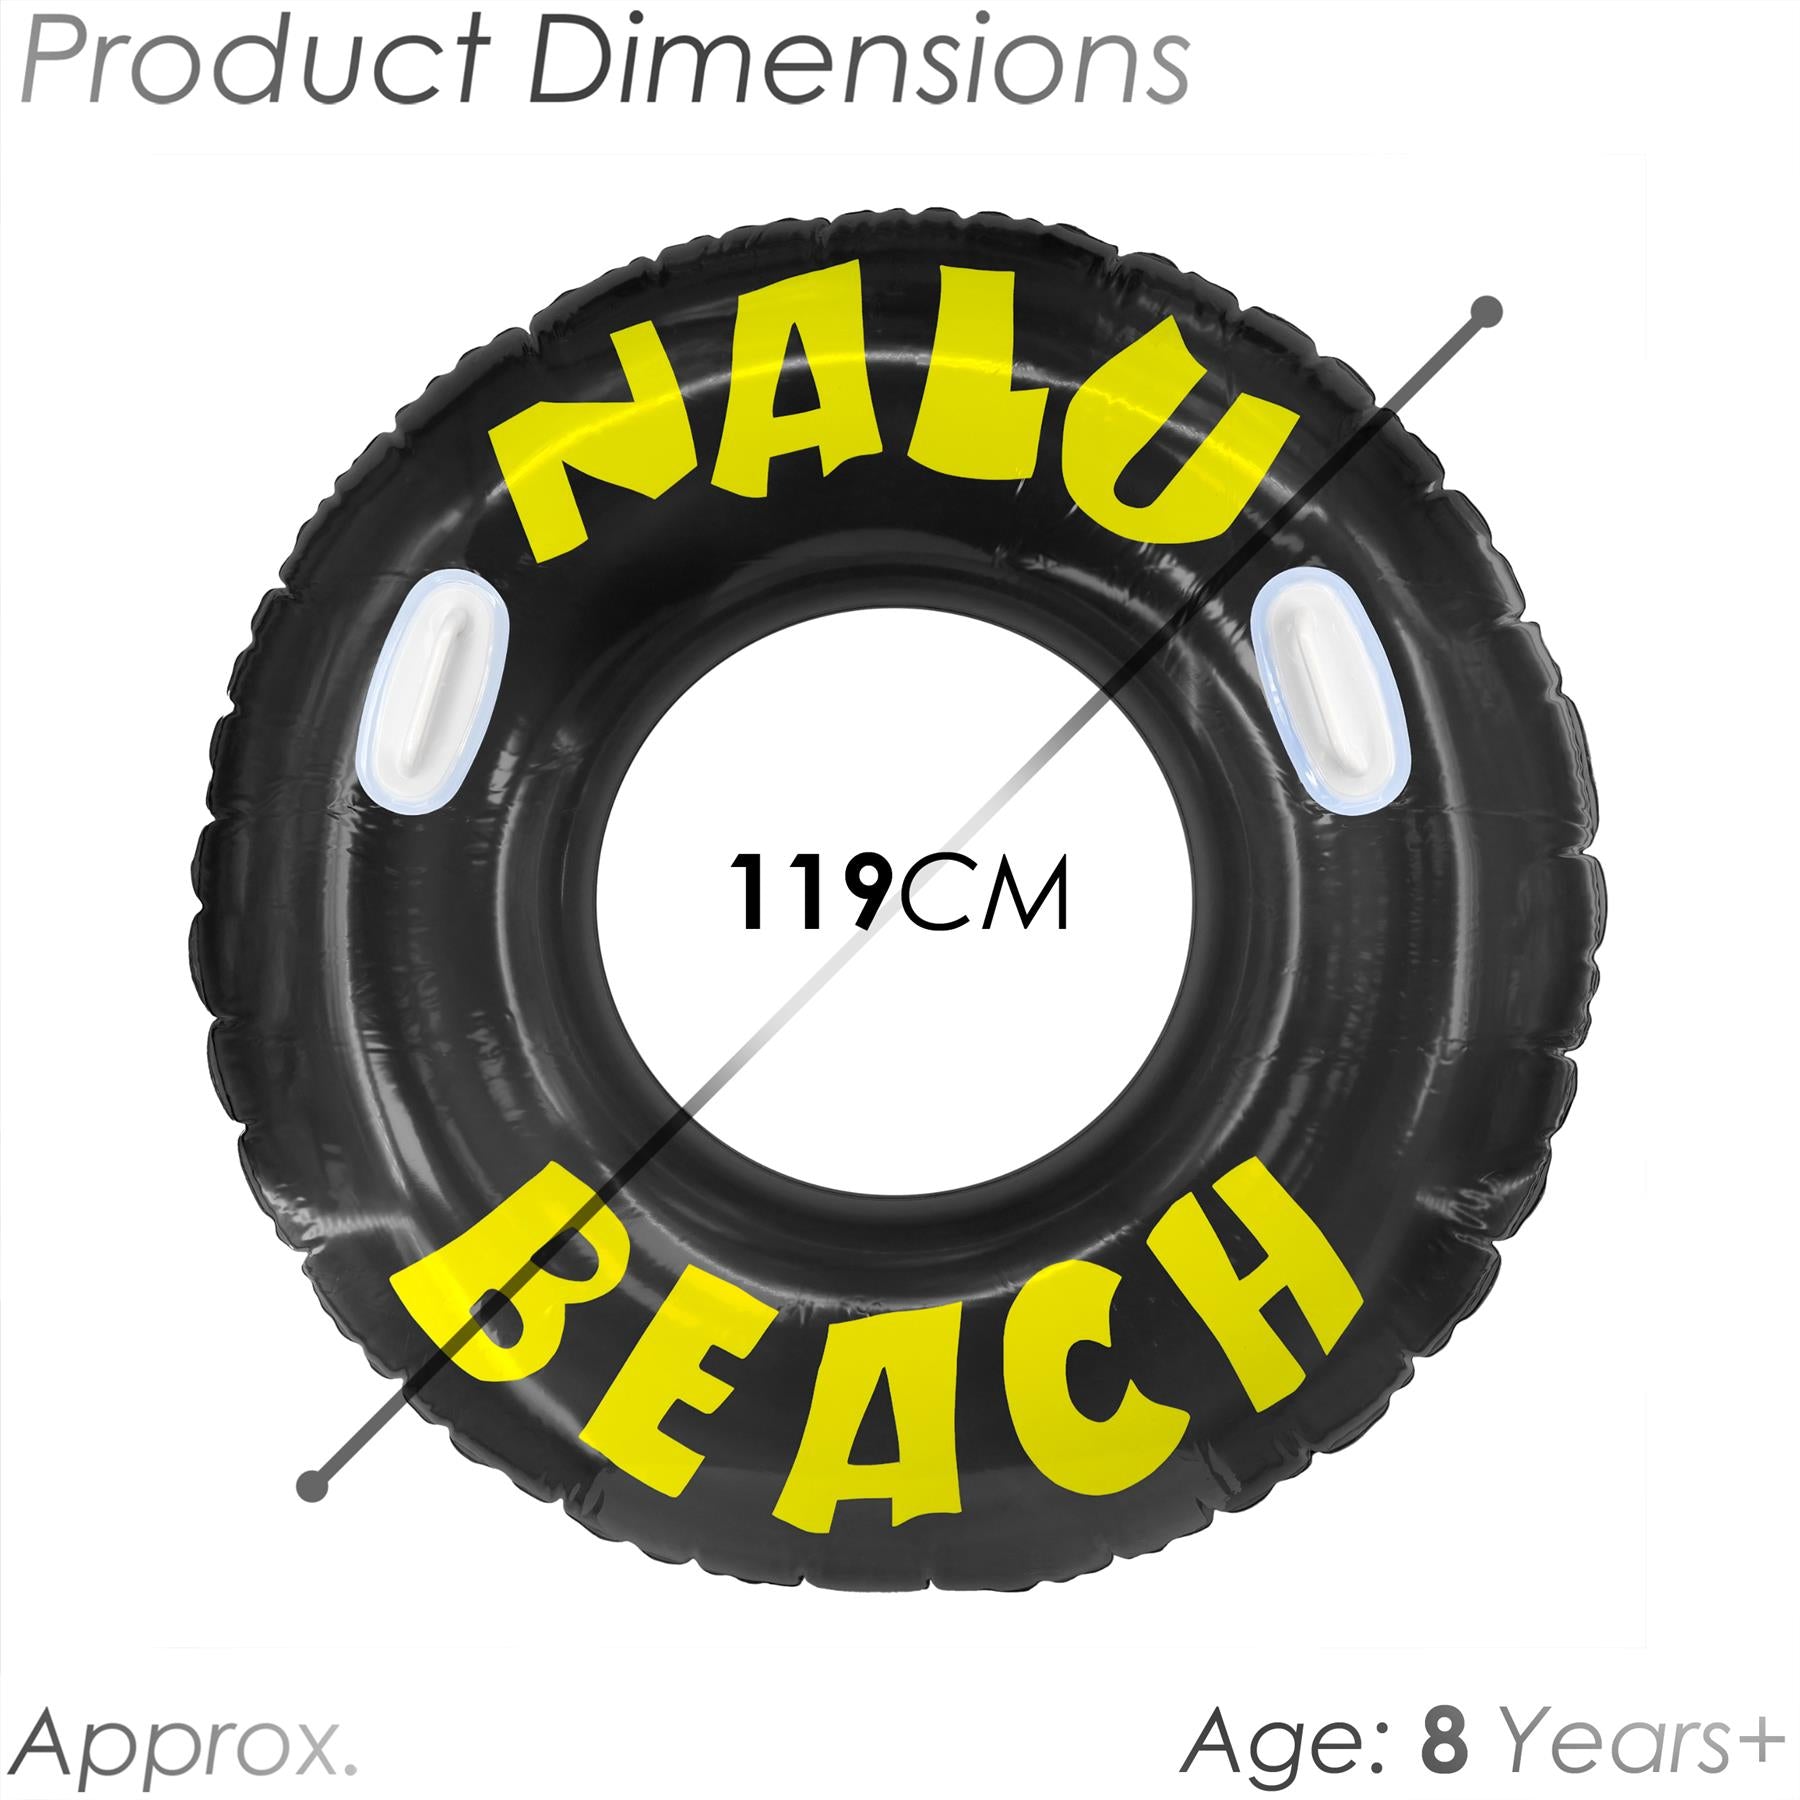 Nalu Black Turbo Tyre Ring With Handles 47" by Nalu - The Magic Toy Shop